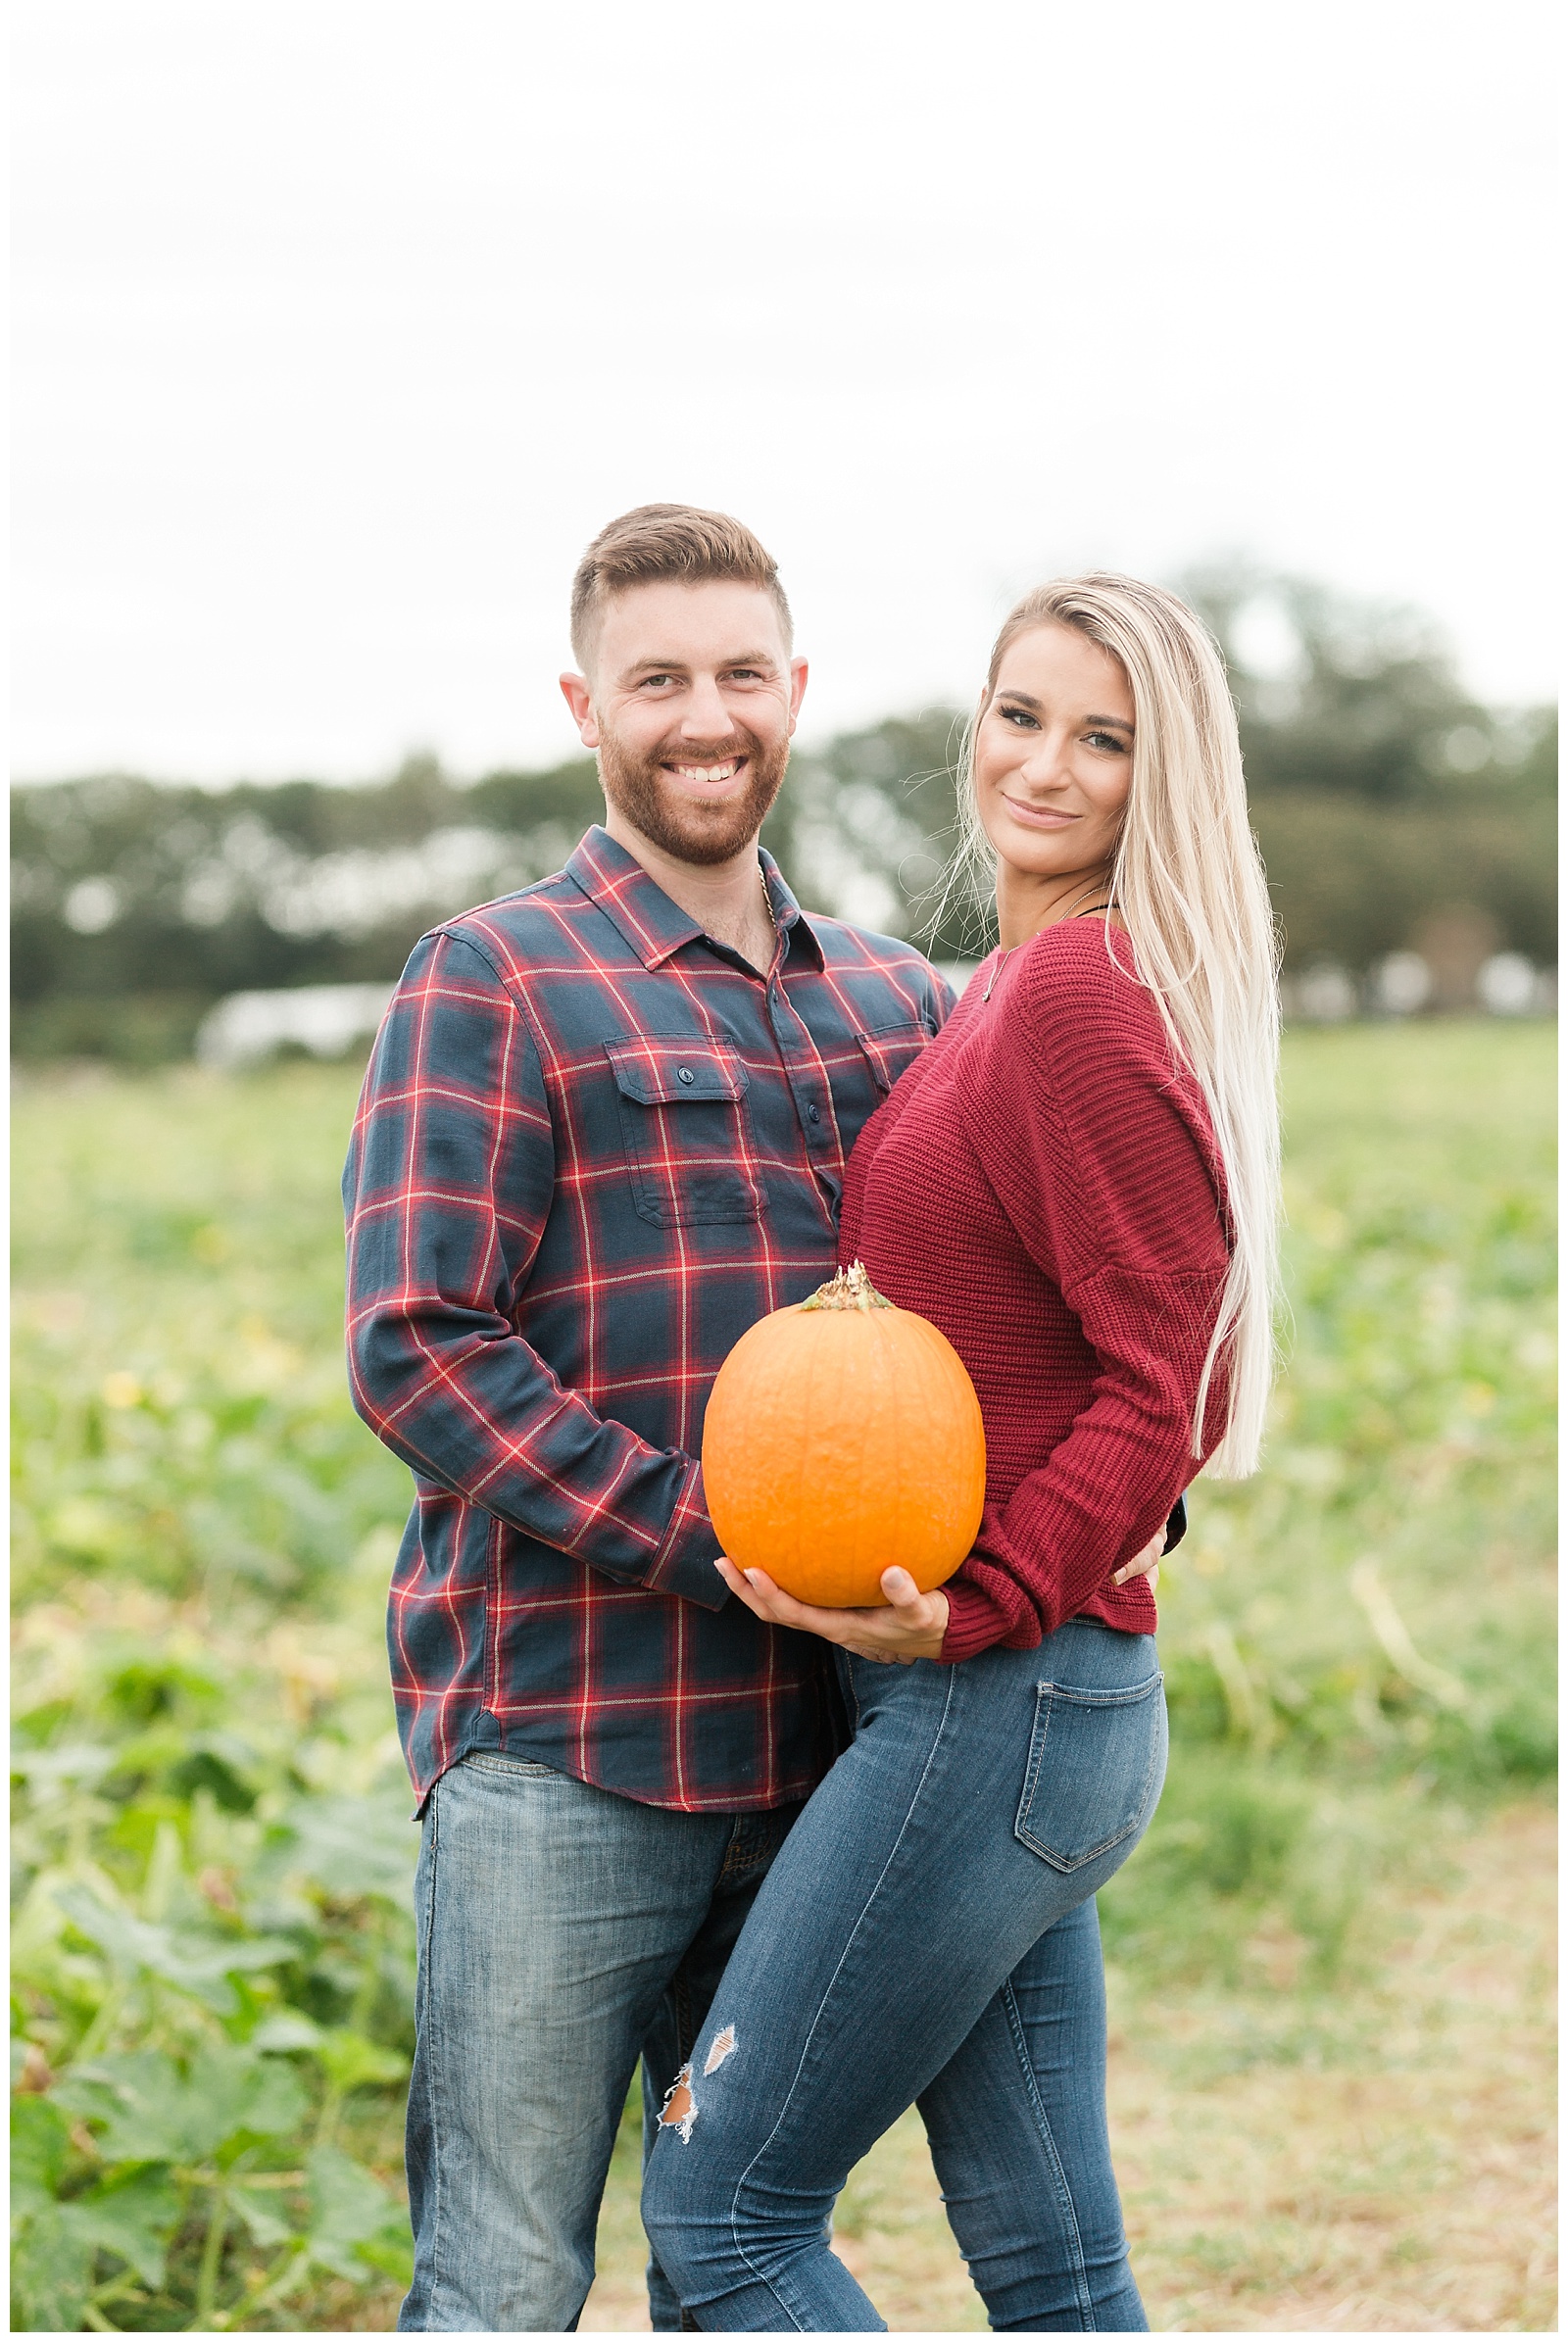 cullipher-farms-engagement-session-70-1.jpg